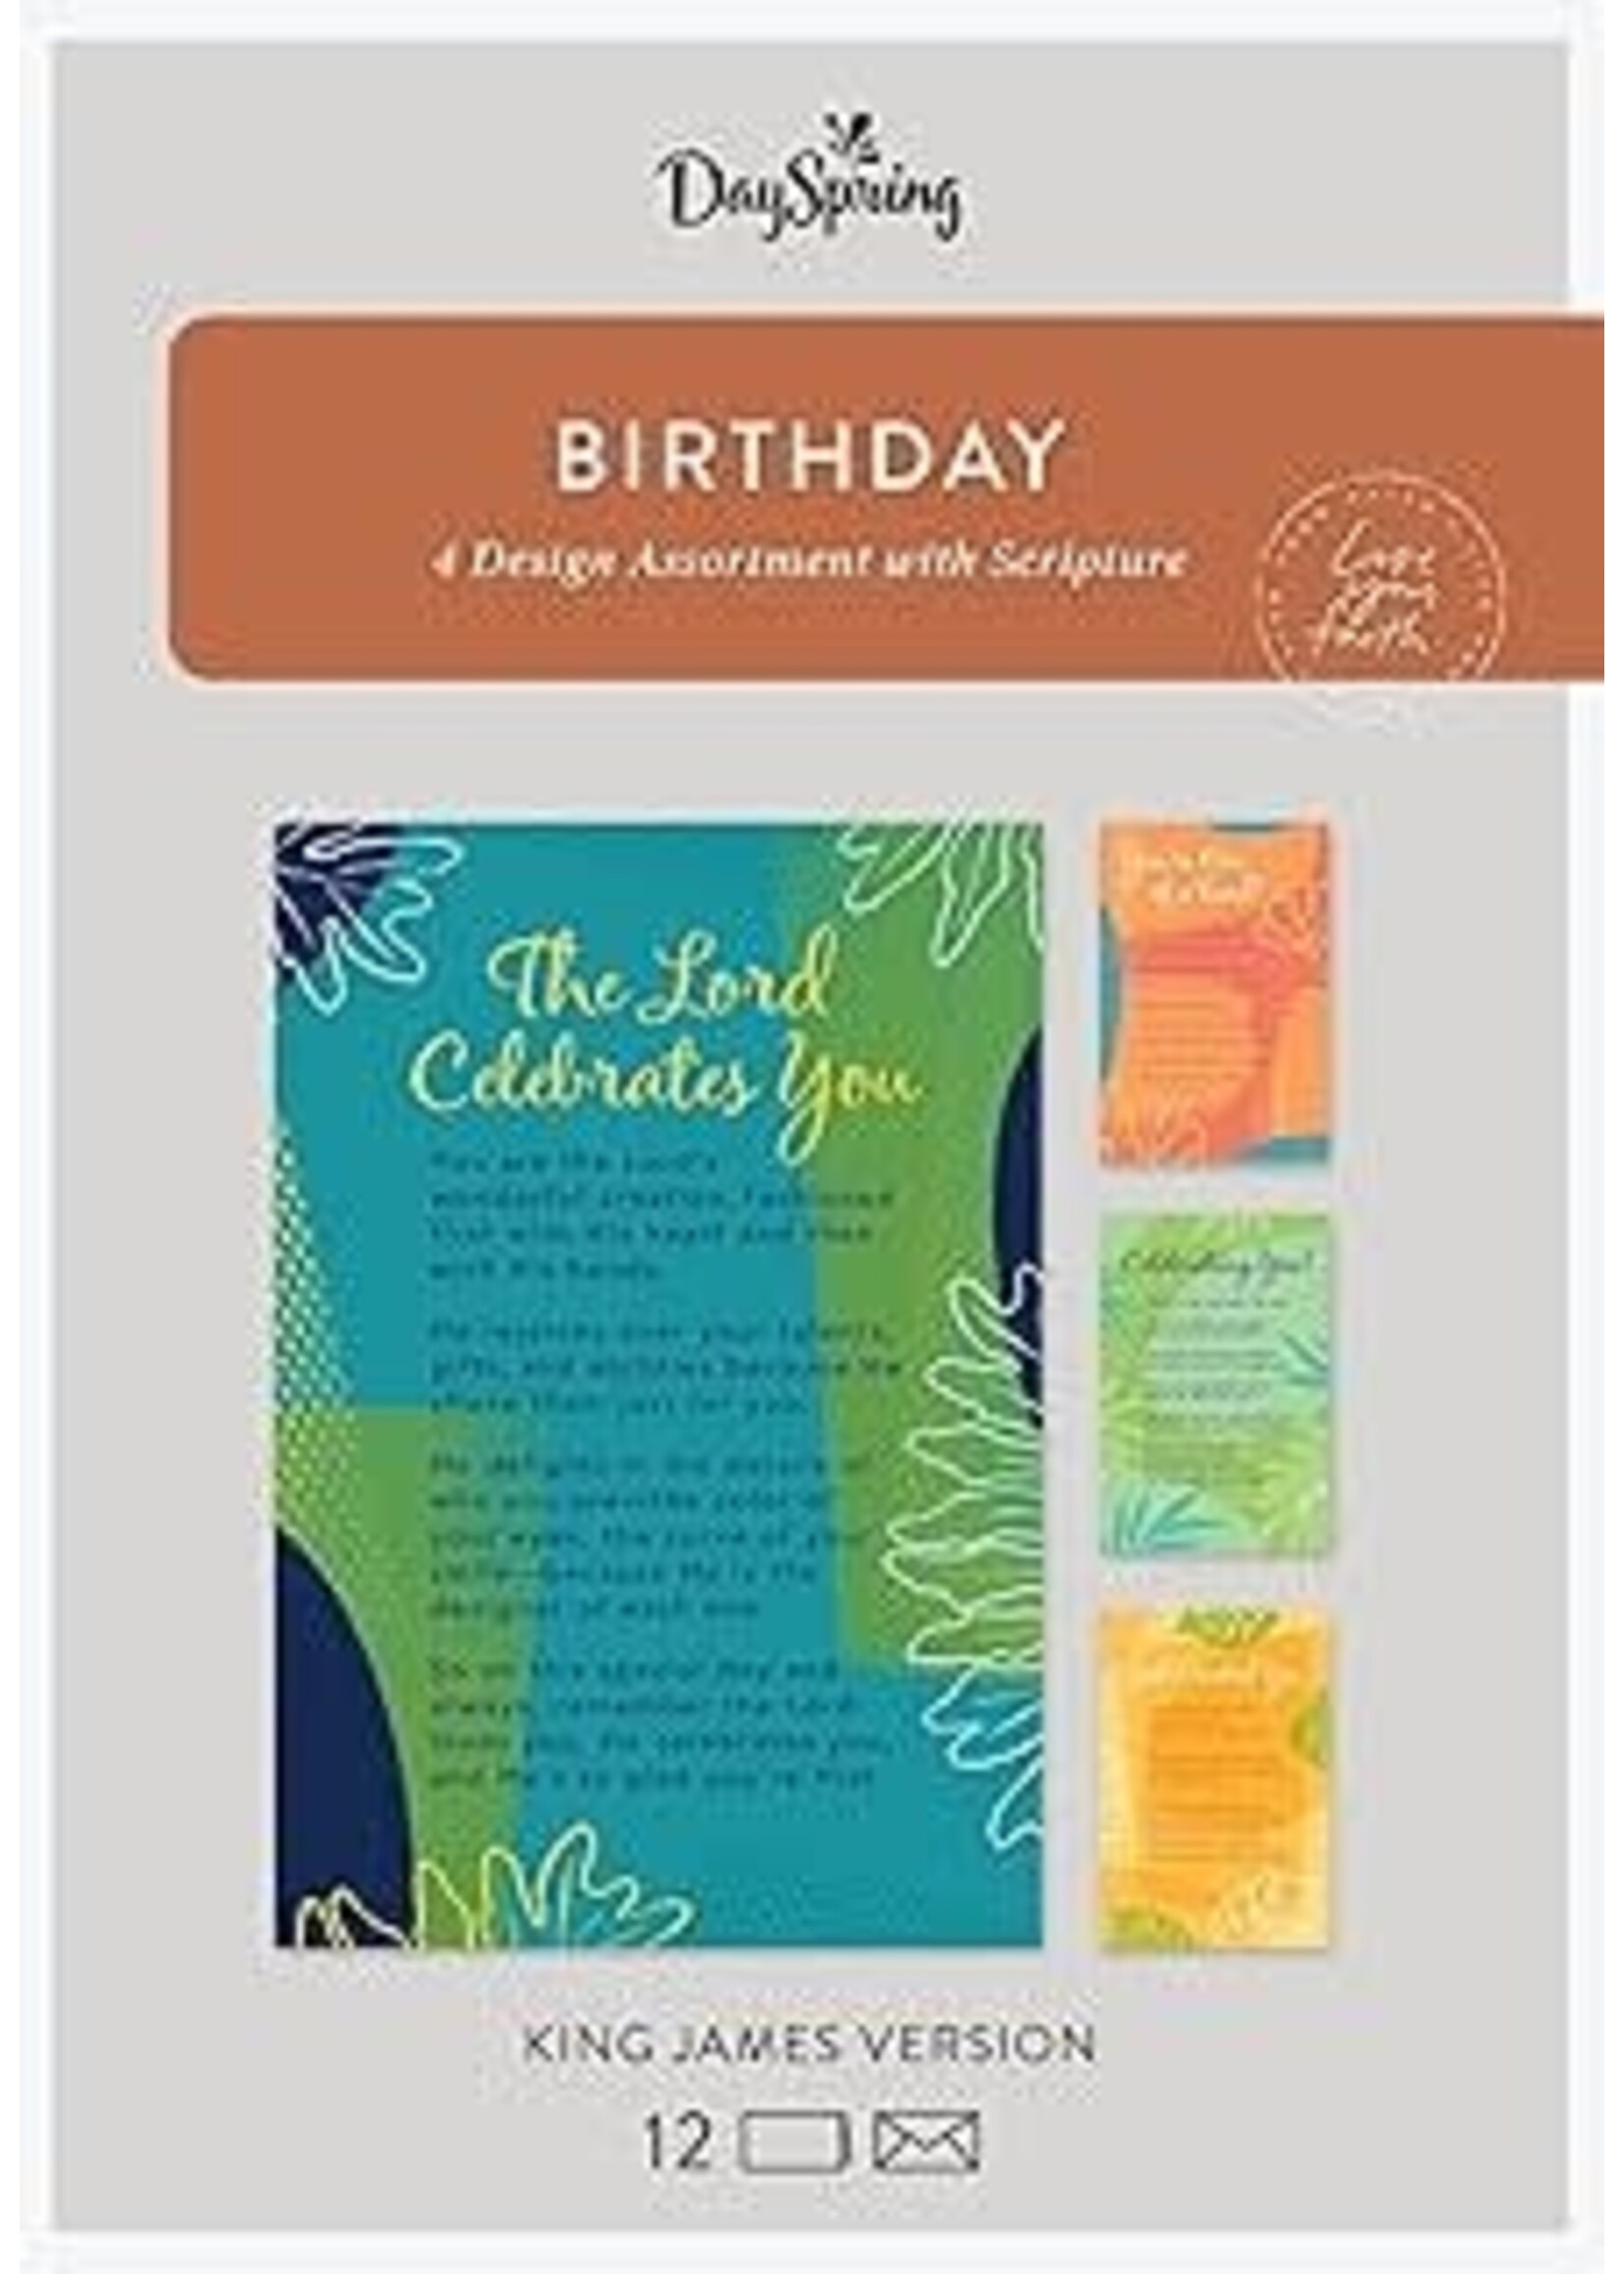 The Lord Celebrates You - Birthday